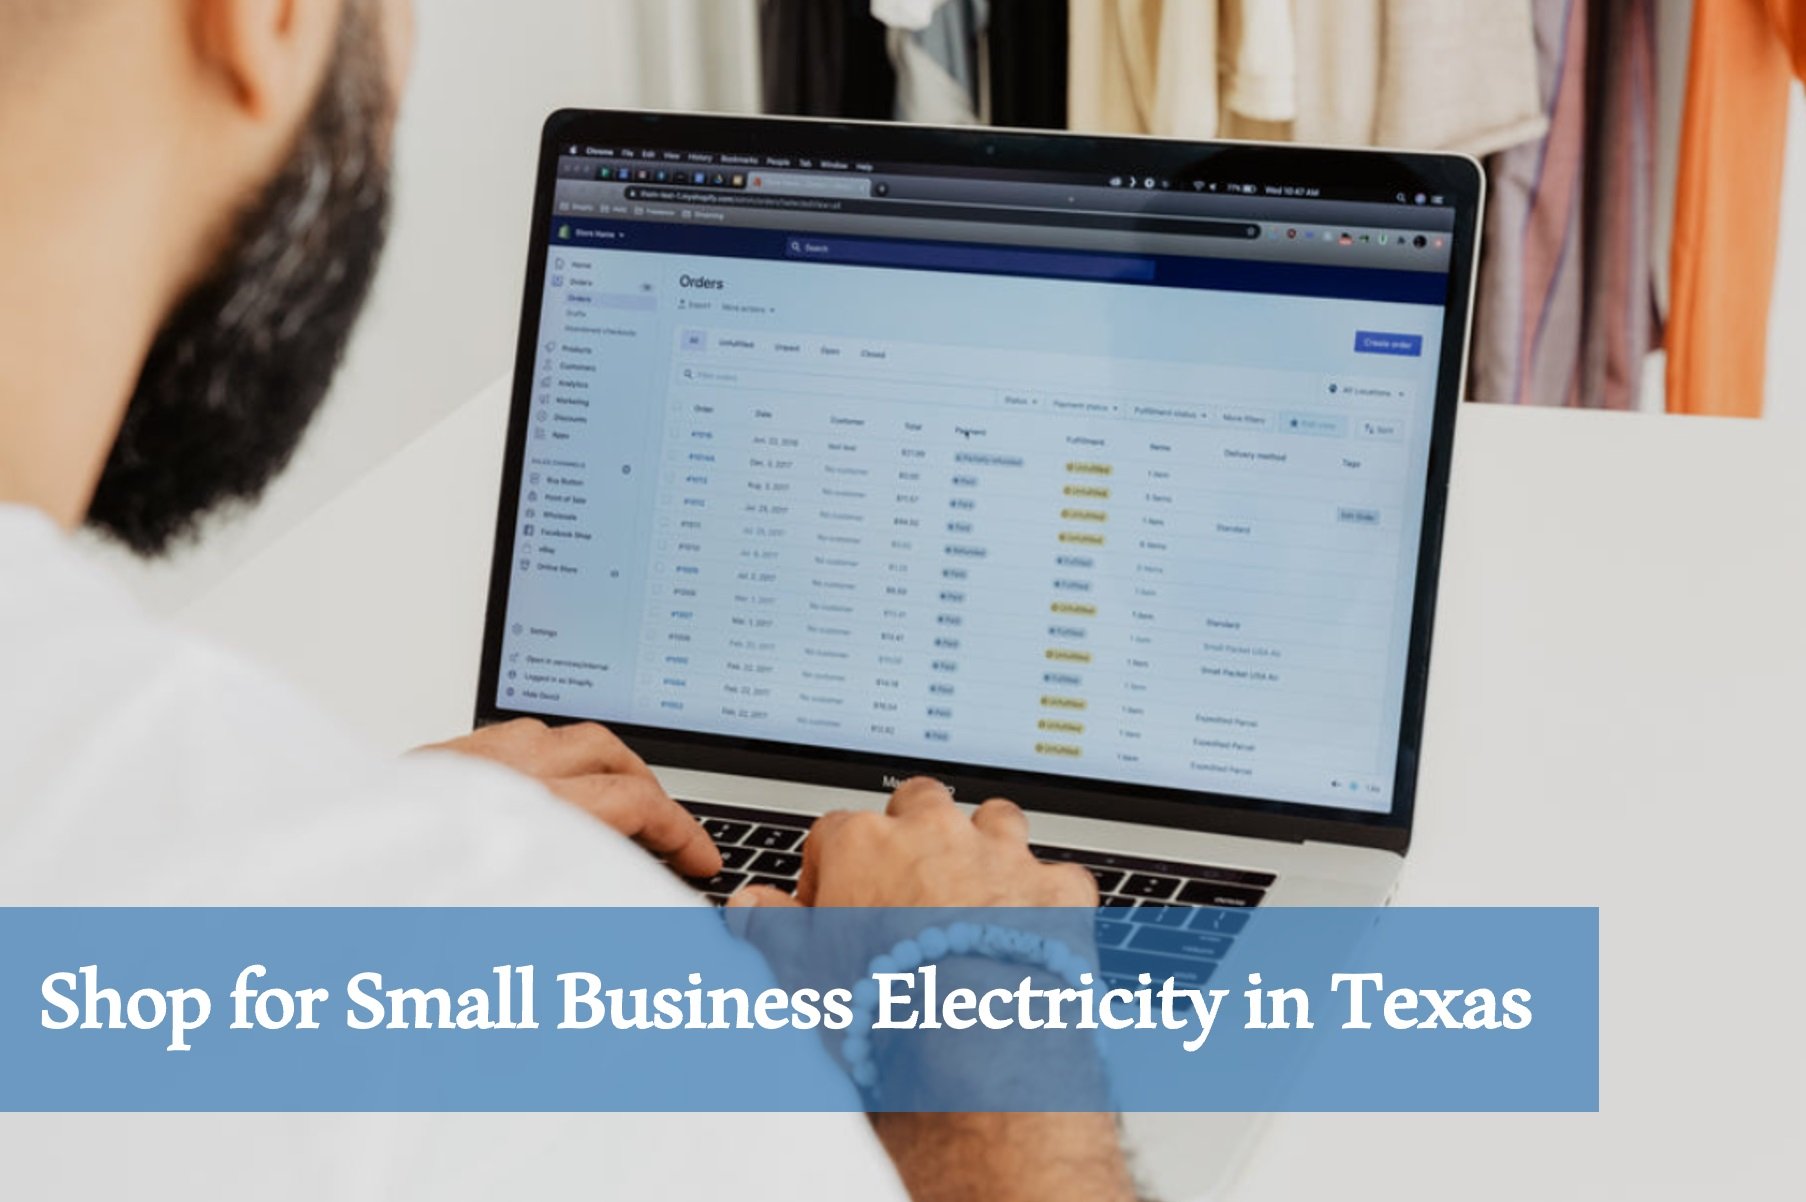 Small Business Electricity in Texas